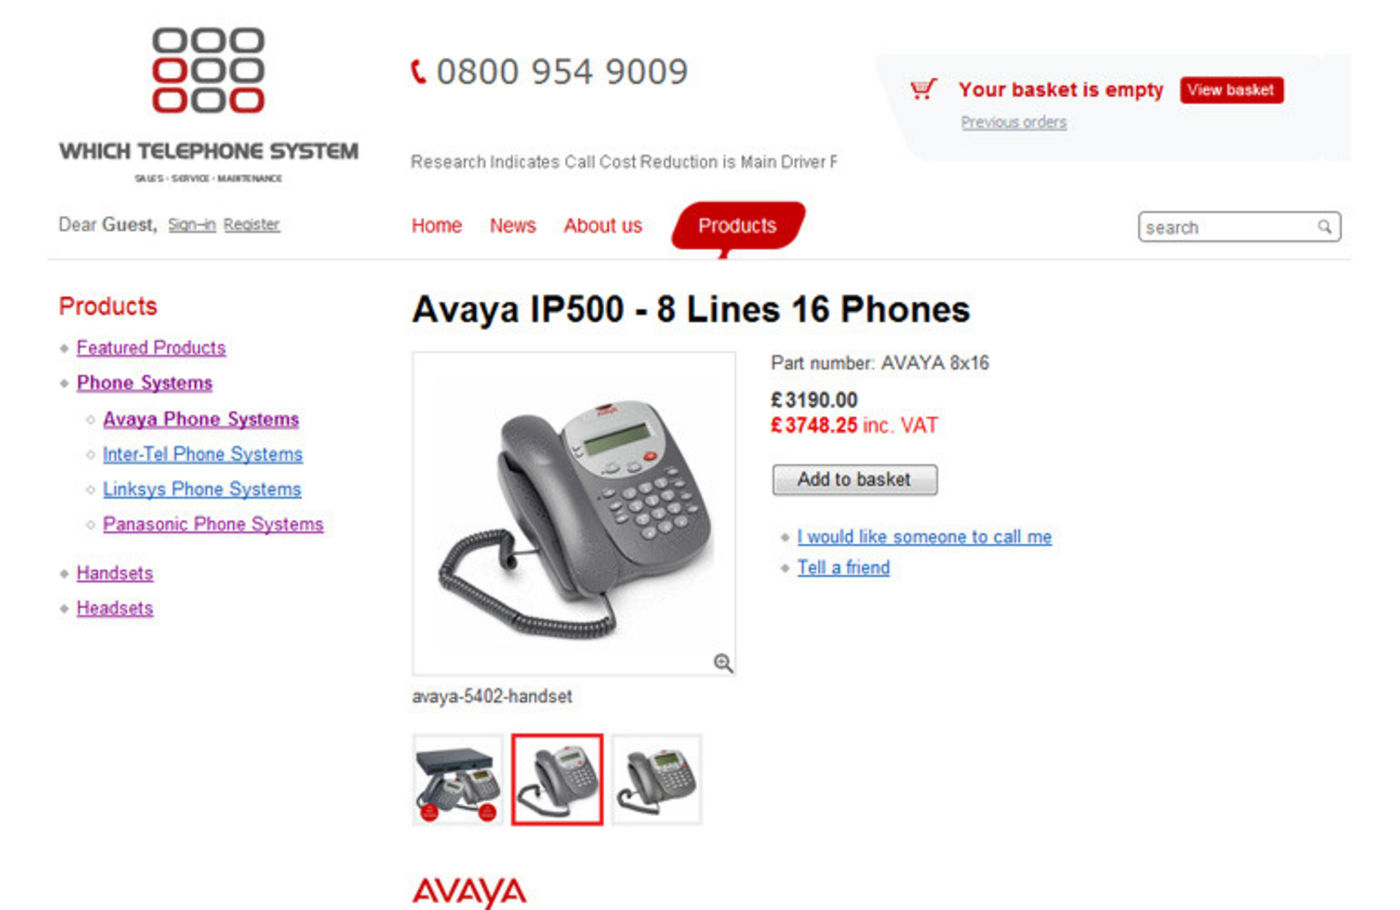 Which Telephone System Product